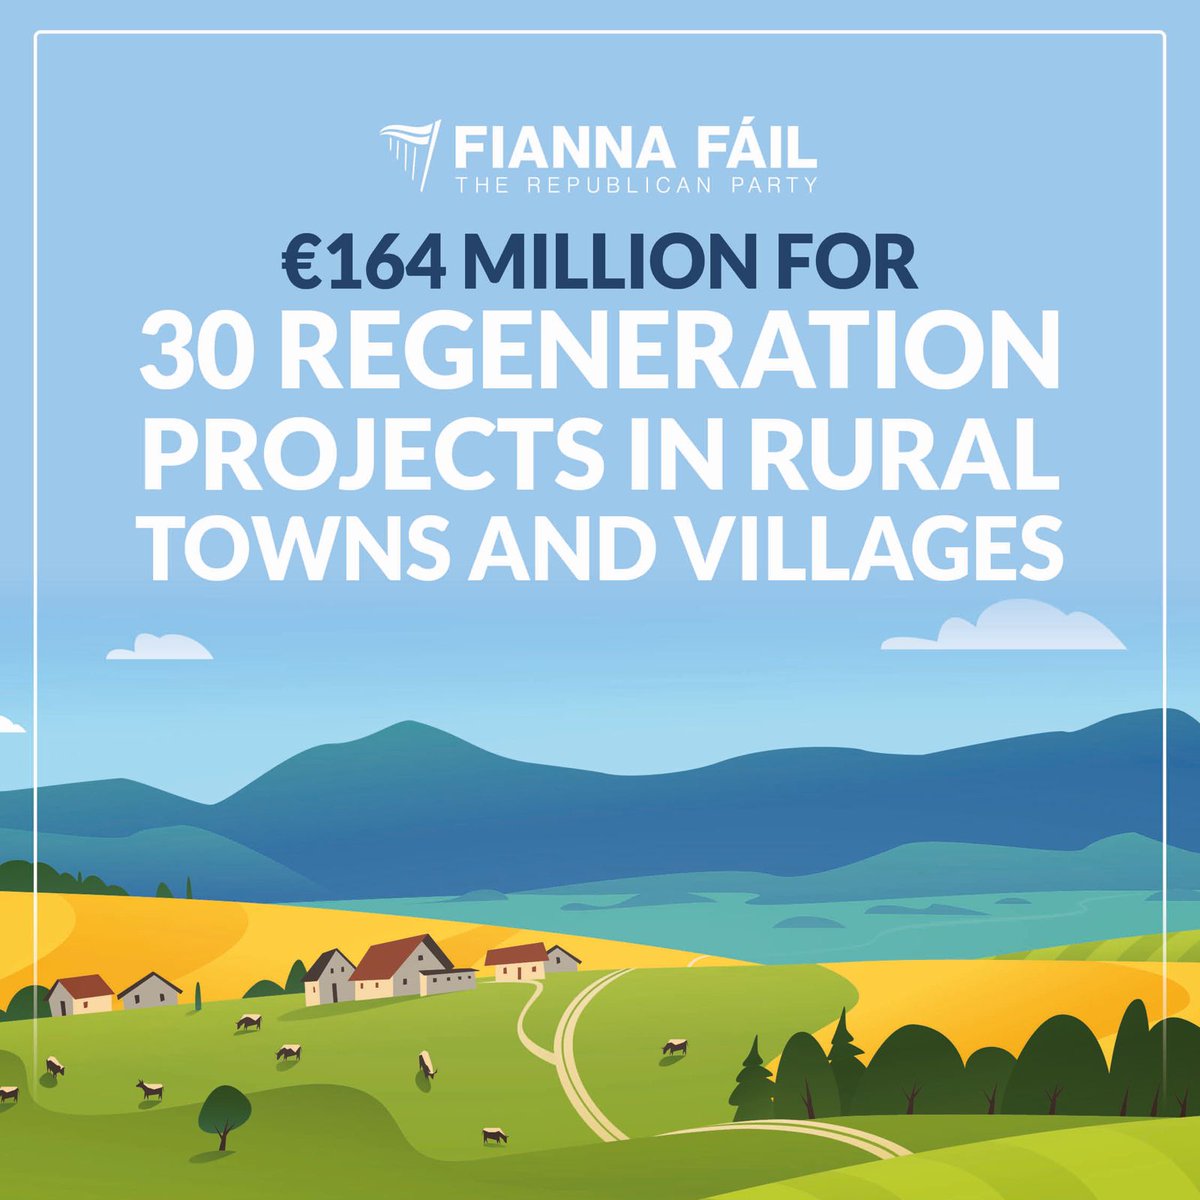 Record funding of €164 million for 30 landmark regeneration projects across the country. Fianna Fáil supports the regeneration of our rural towns and villages. We will continue to prioritise transformative projects to revitalise town centres and stimulate the rural economy.